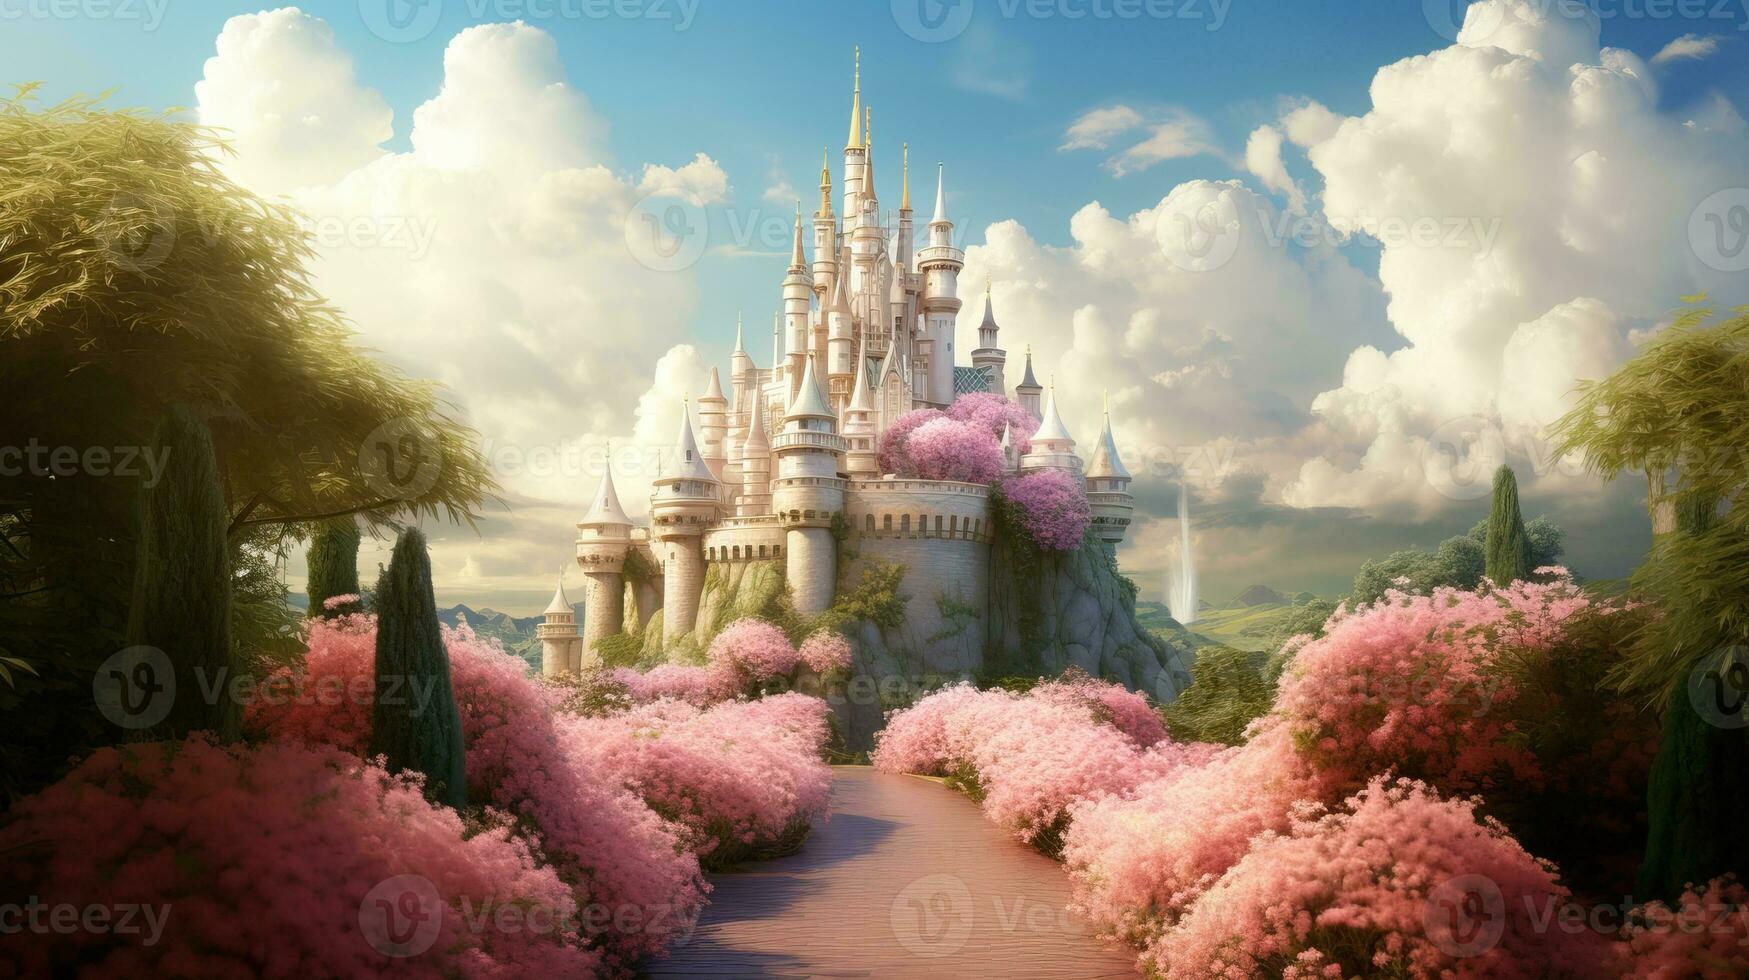 A fabulous castle with a path of lush flowers and cotton candy clouds photo